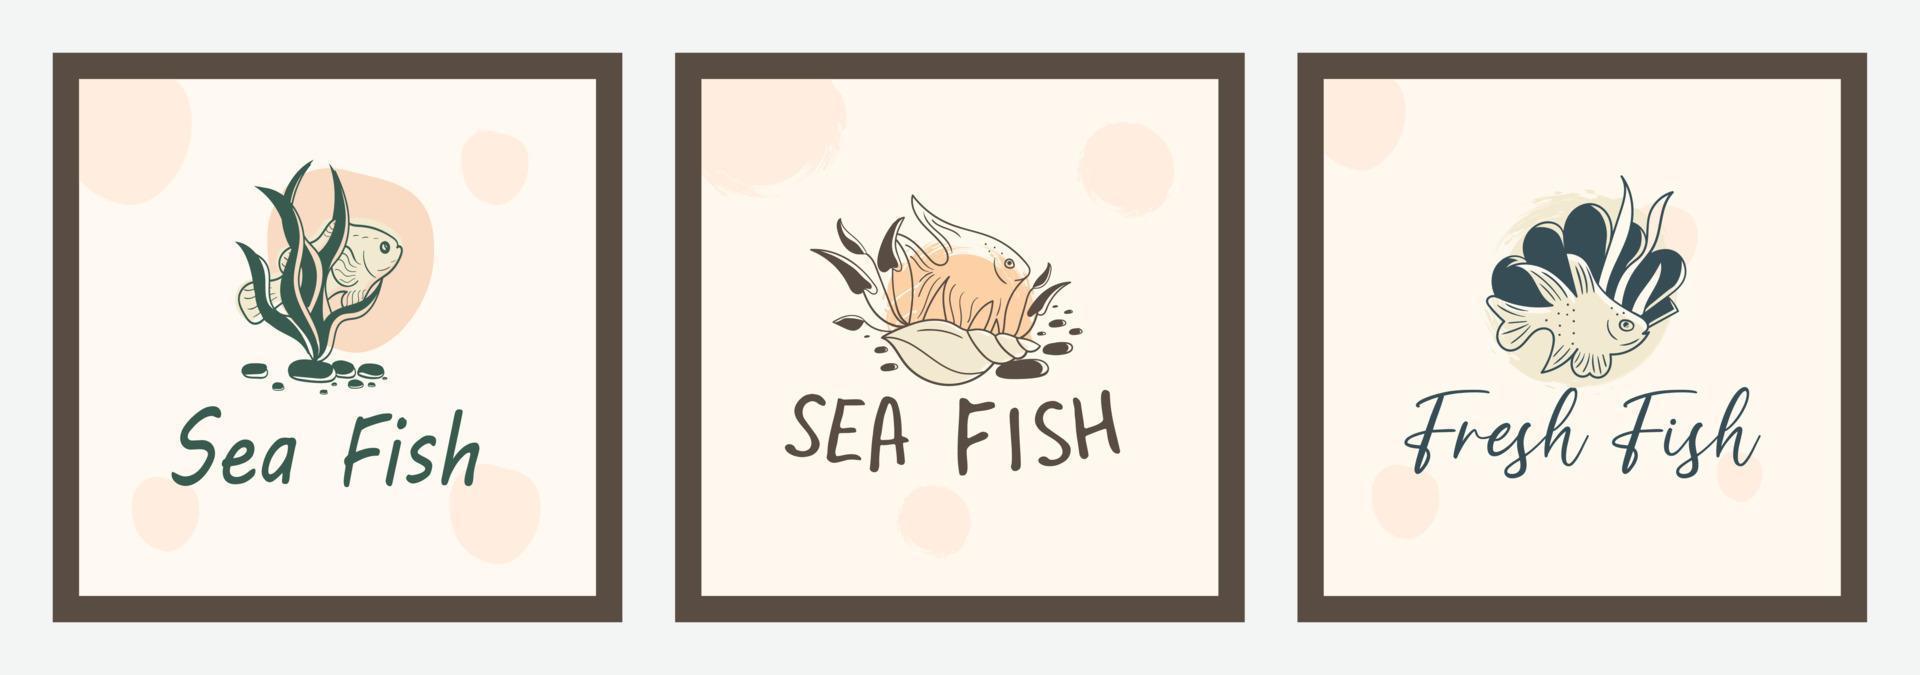 Hand drawn see food or fish logo design collection with under water ocean elements vector